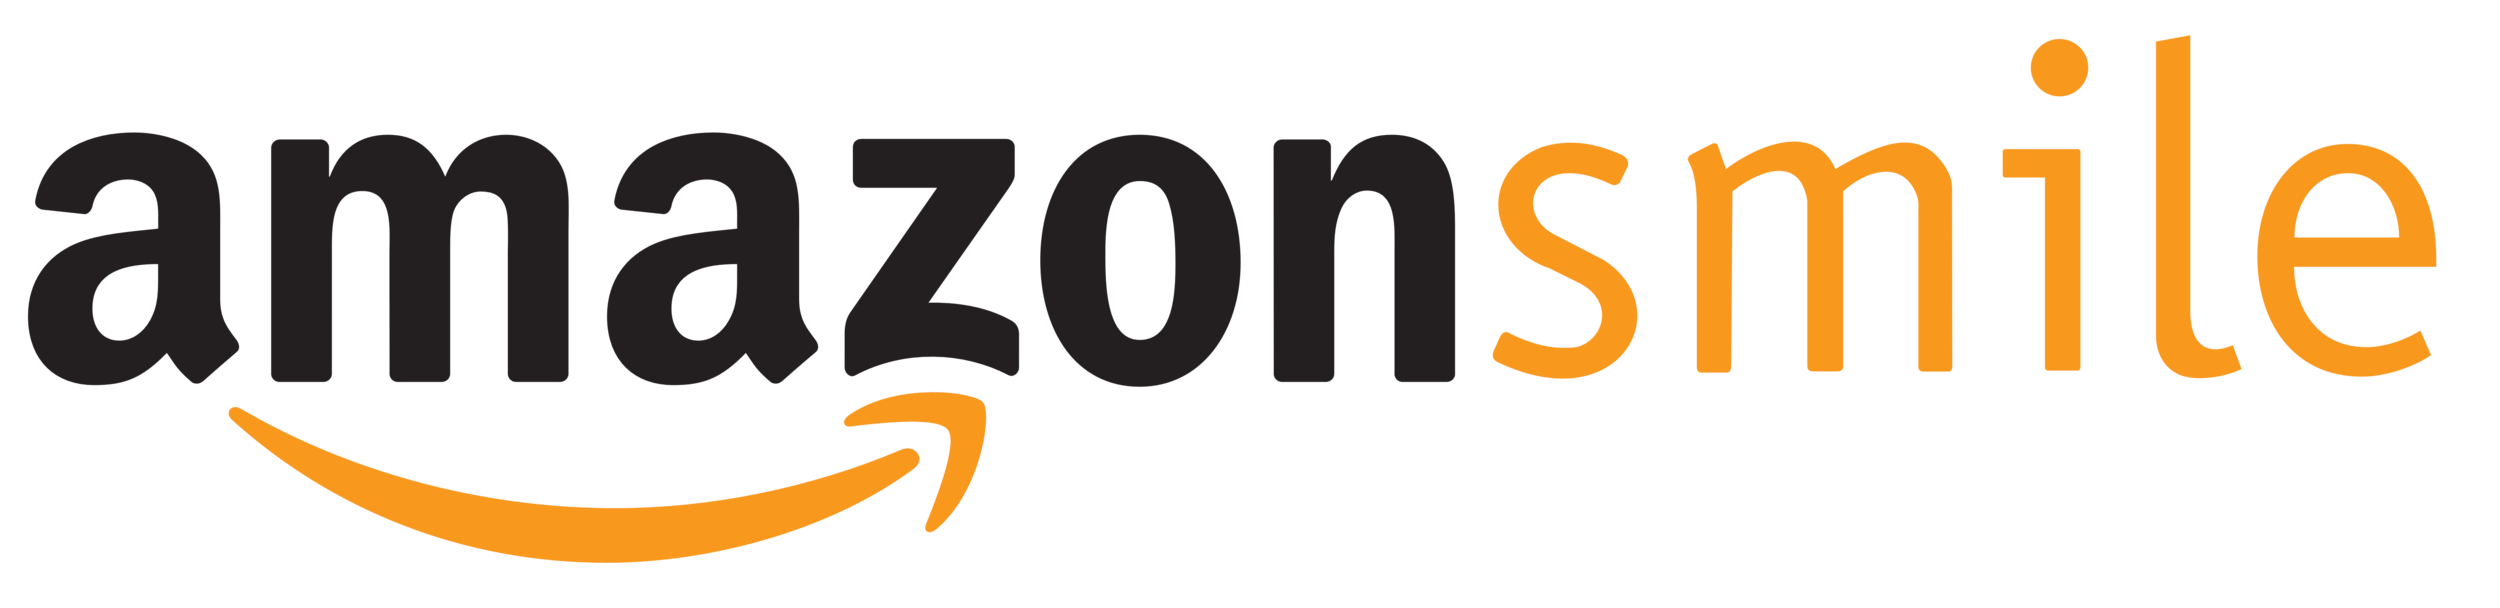 AmazonSmile-logo-find-charity-change.png